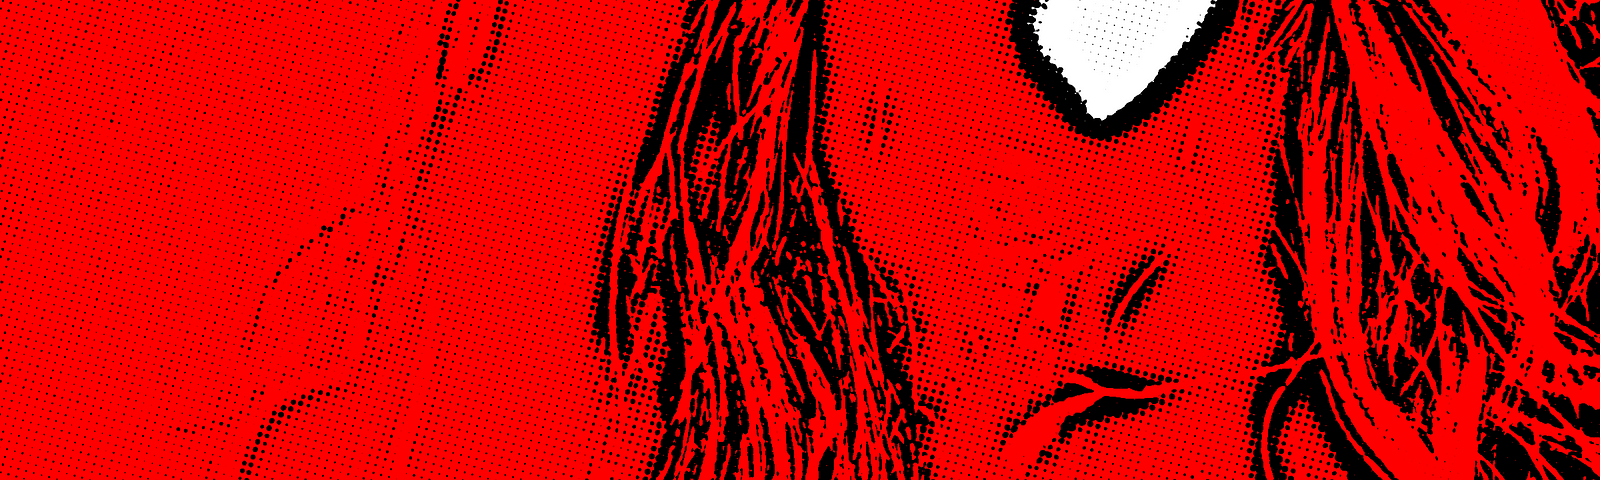 A woman with long, flowing hair is seen from the mouth down, her lips slightly parted. The image is modified from a black and white photo, rendered in black halftone dots over a mostly red background.